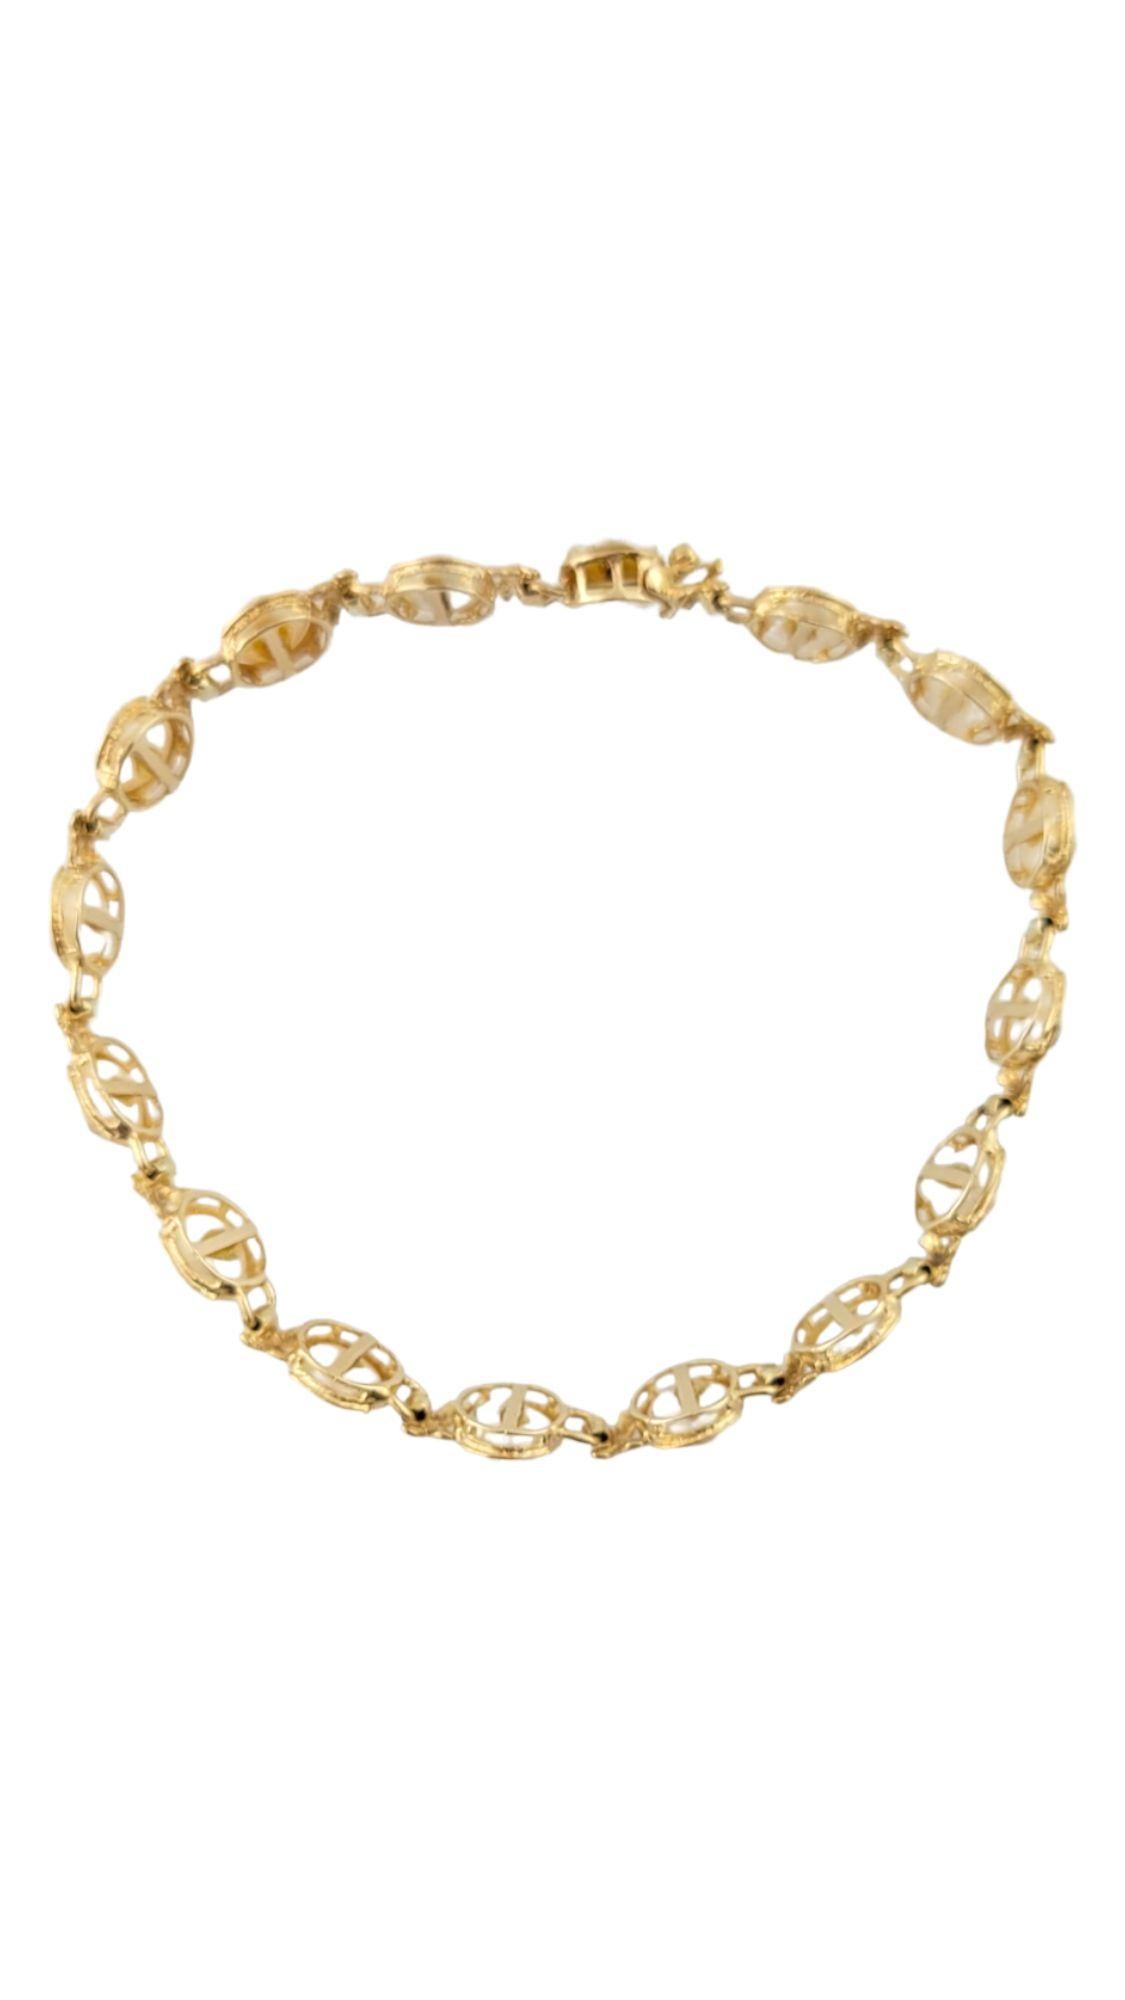 This gorgeous 14K yellow gold bracelet is paired with 16 beautiful freshwater pearls!

Pearls: 6mm

Bracelet length: 6 3/4